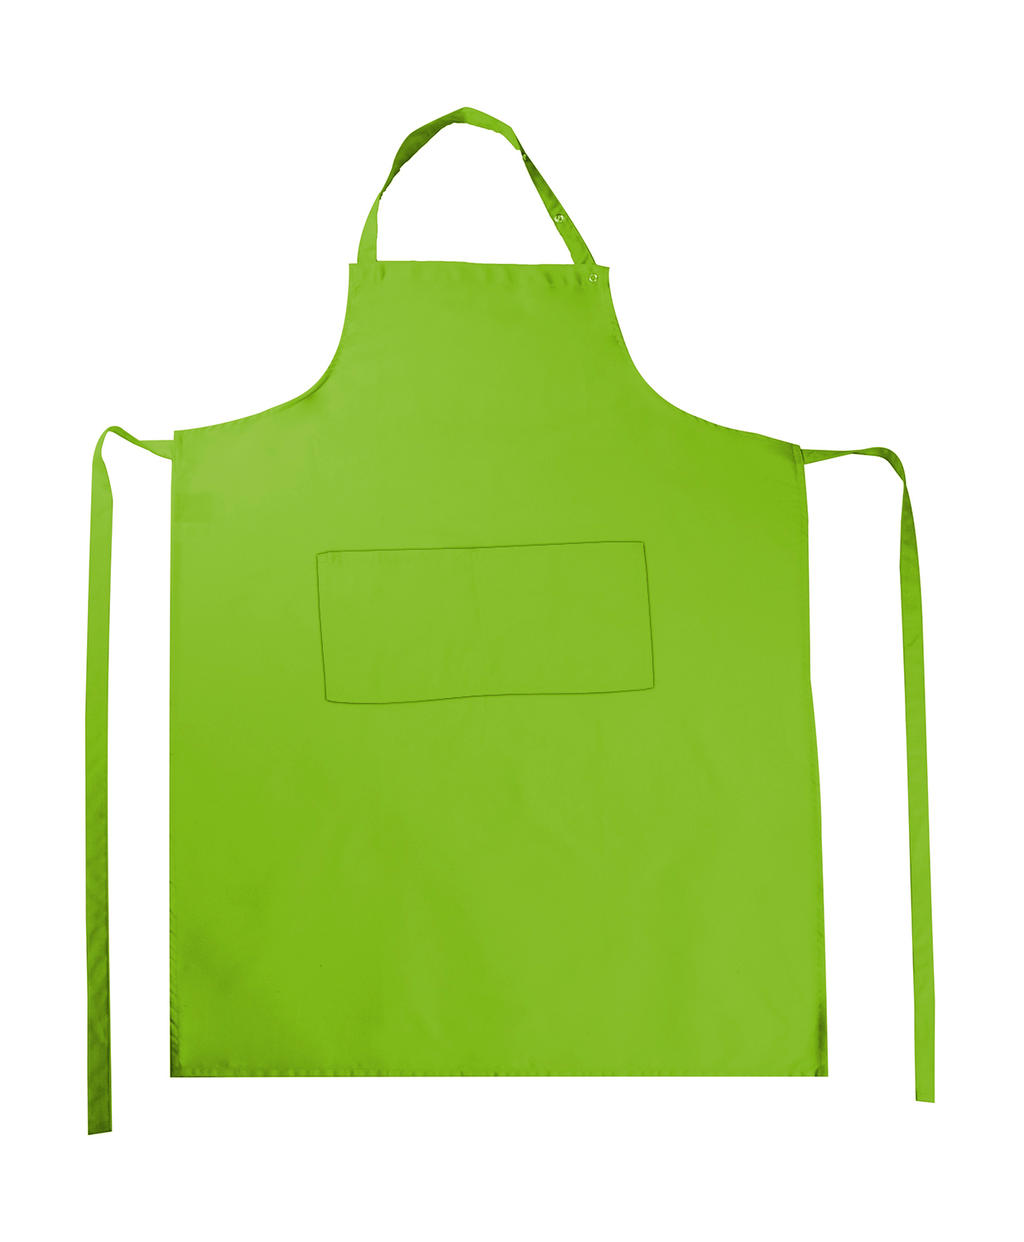  Amsterdam Bib Apron with Pocket in Farbe Lime